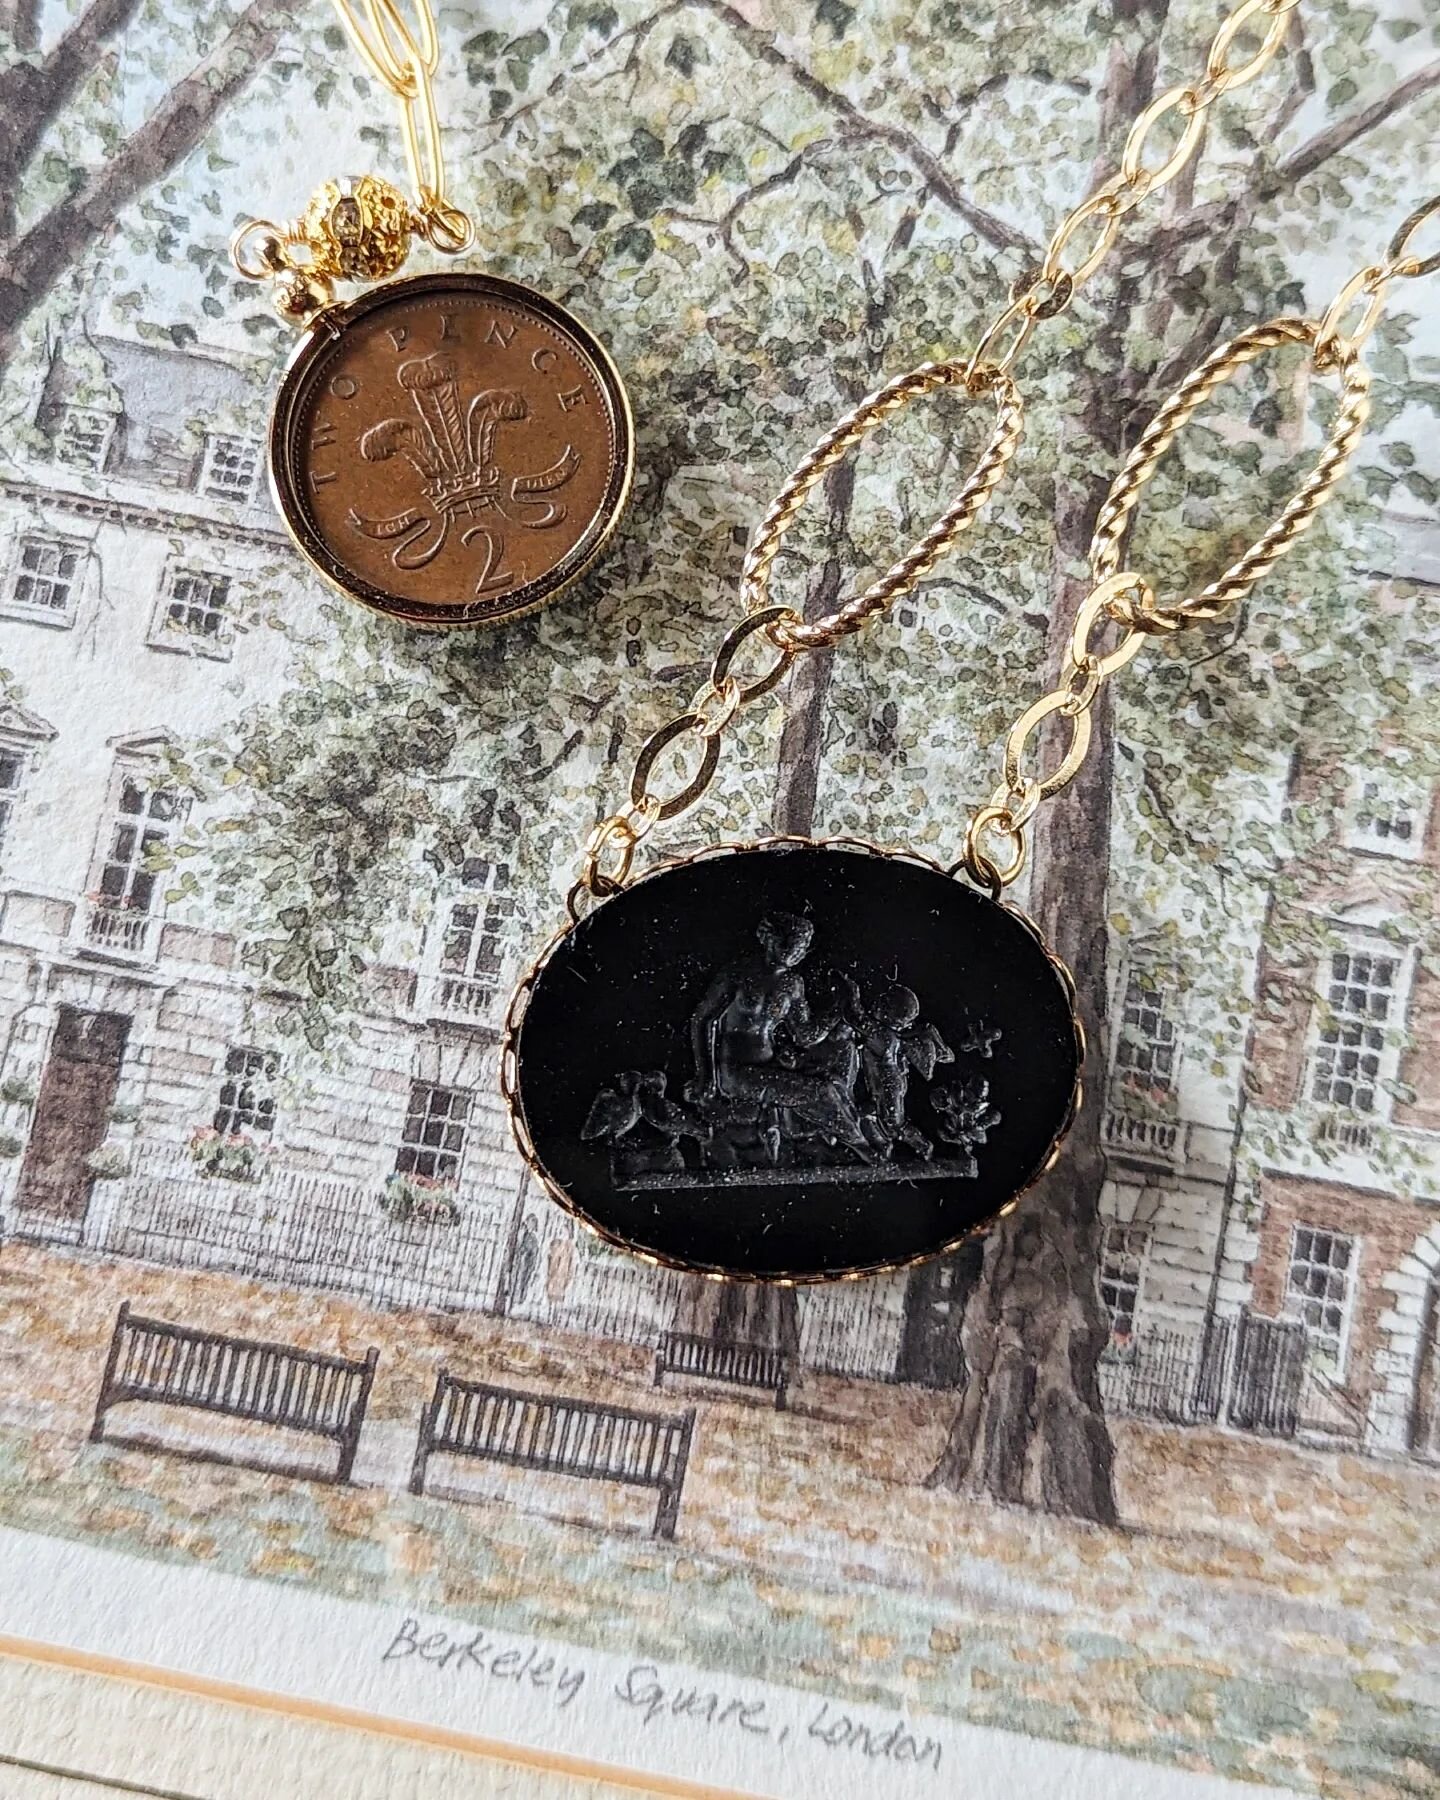 Here are just a couple of our newly restocked necklaces from @74harleystreet: 1985 Two Pence Coin and Vintage Black Glass Intaglio. Come see more beauties during our second weekend market this Friday through Sunday!

The beautiful Christmas tree has 